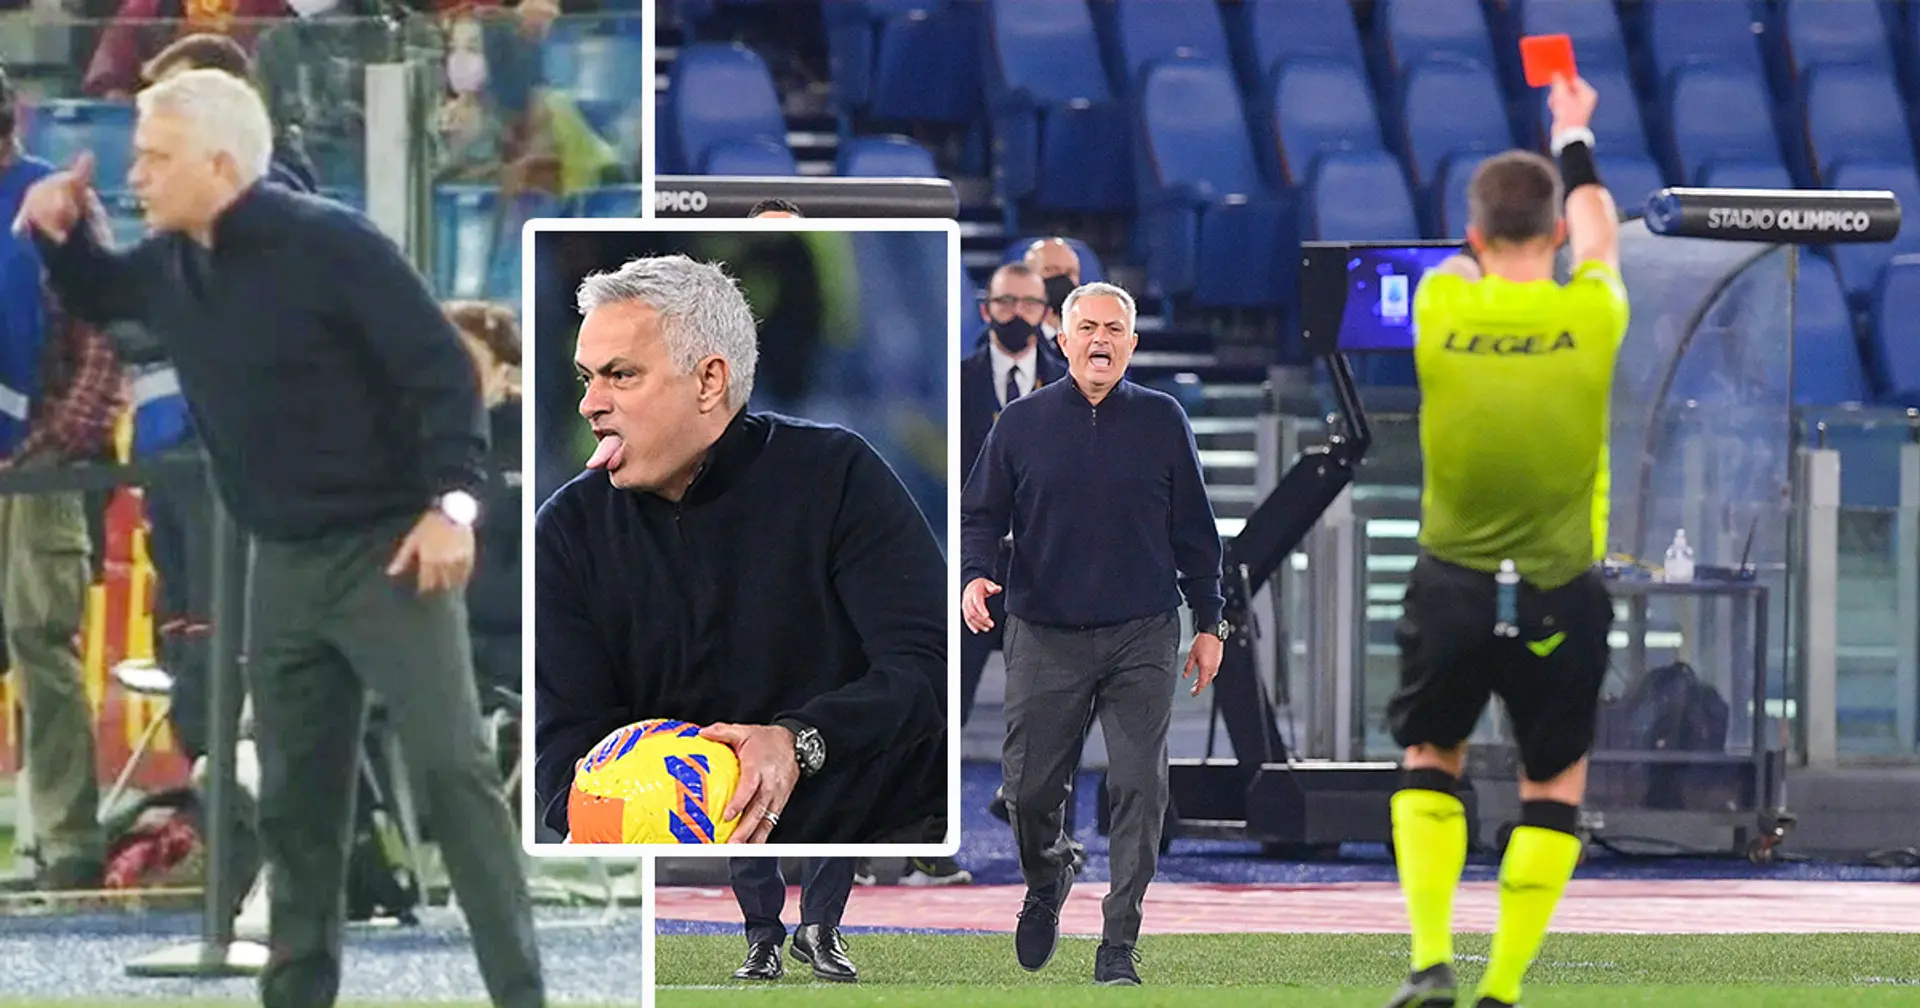 Jose Mourinho faces 3-match ban after getting into more trouble with Italian referees